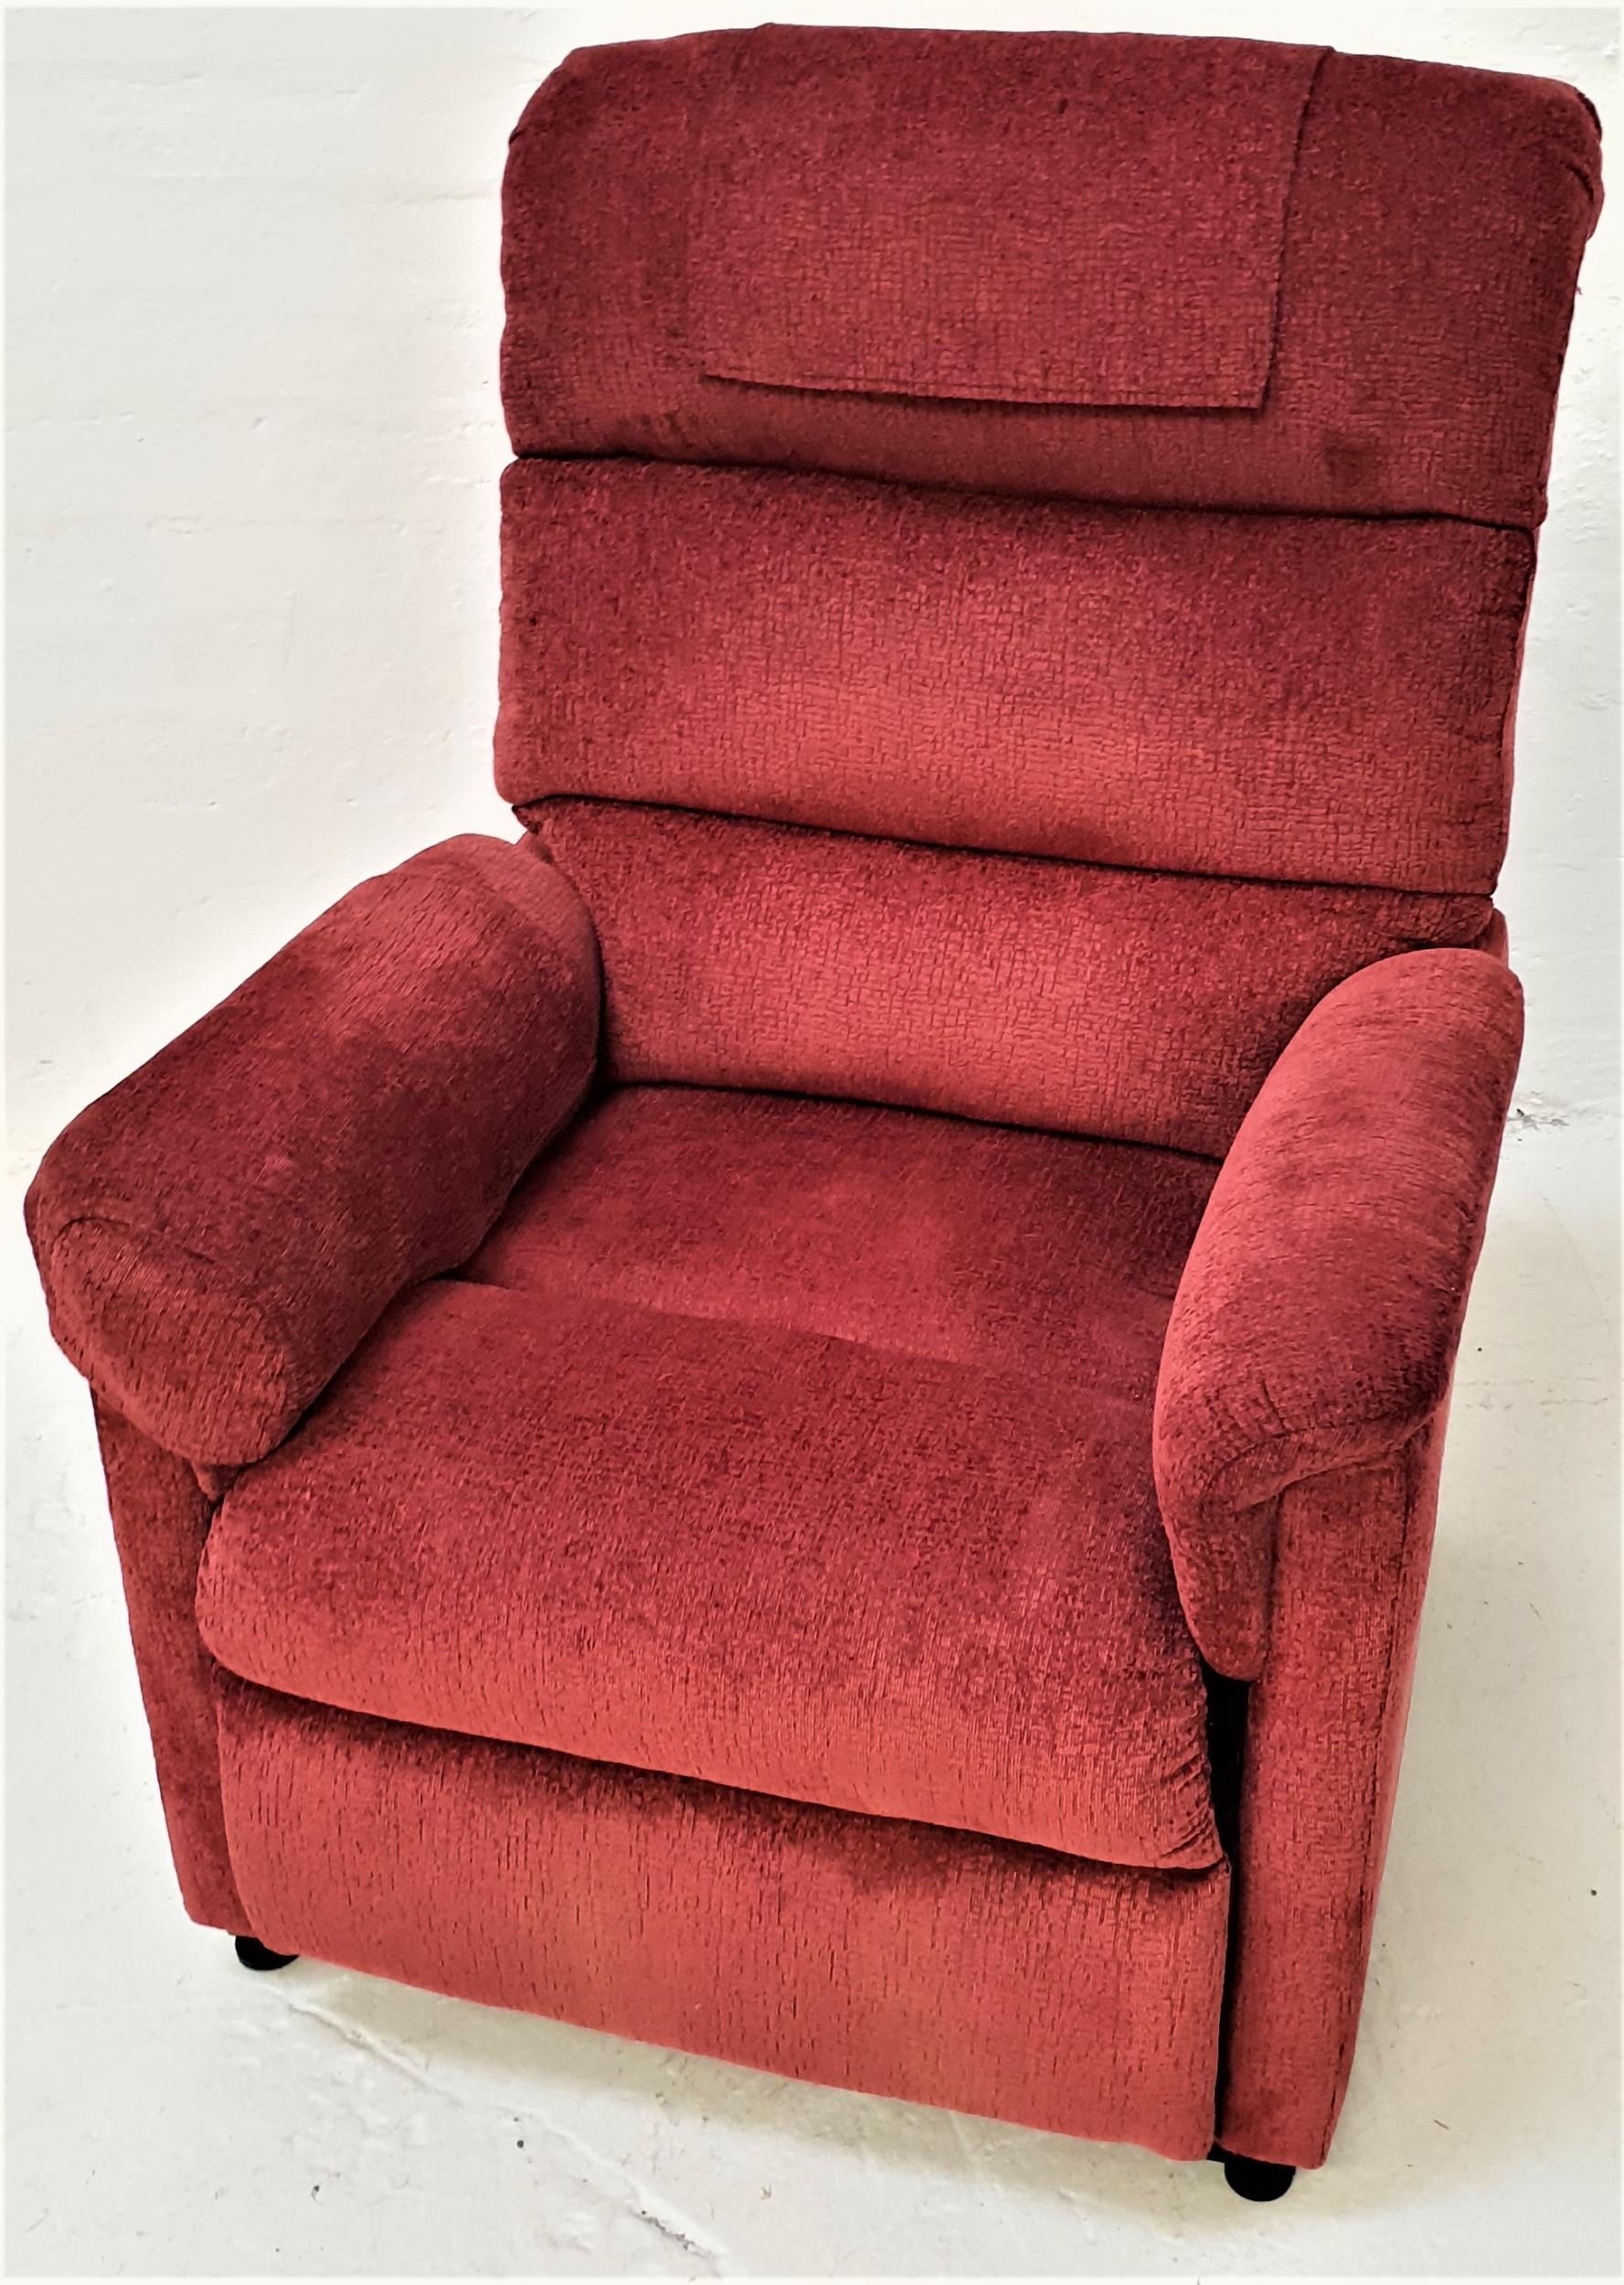 ROMA ELECTRIC RISE AND RECLINE ARMCHAIR covered in a claret coloured material, with hand unit